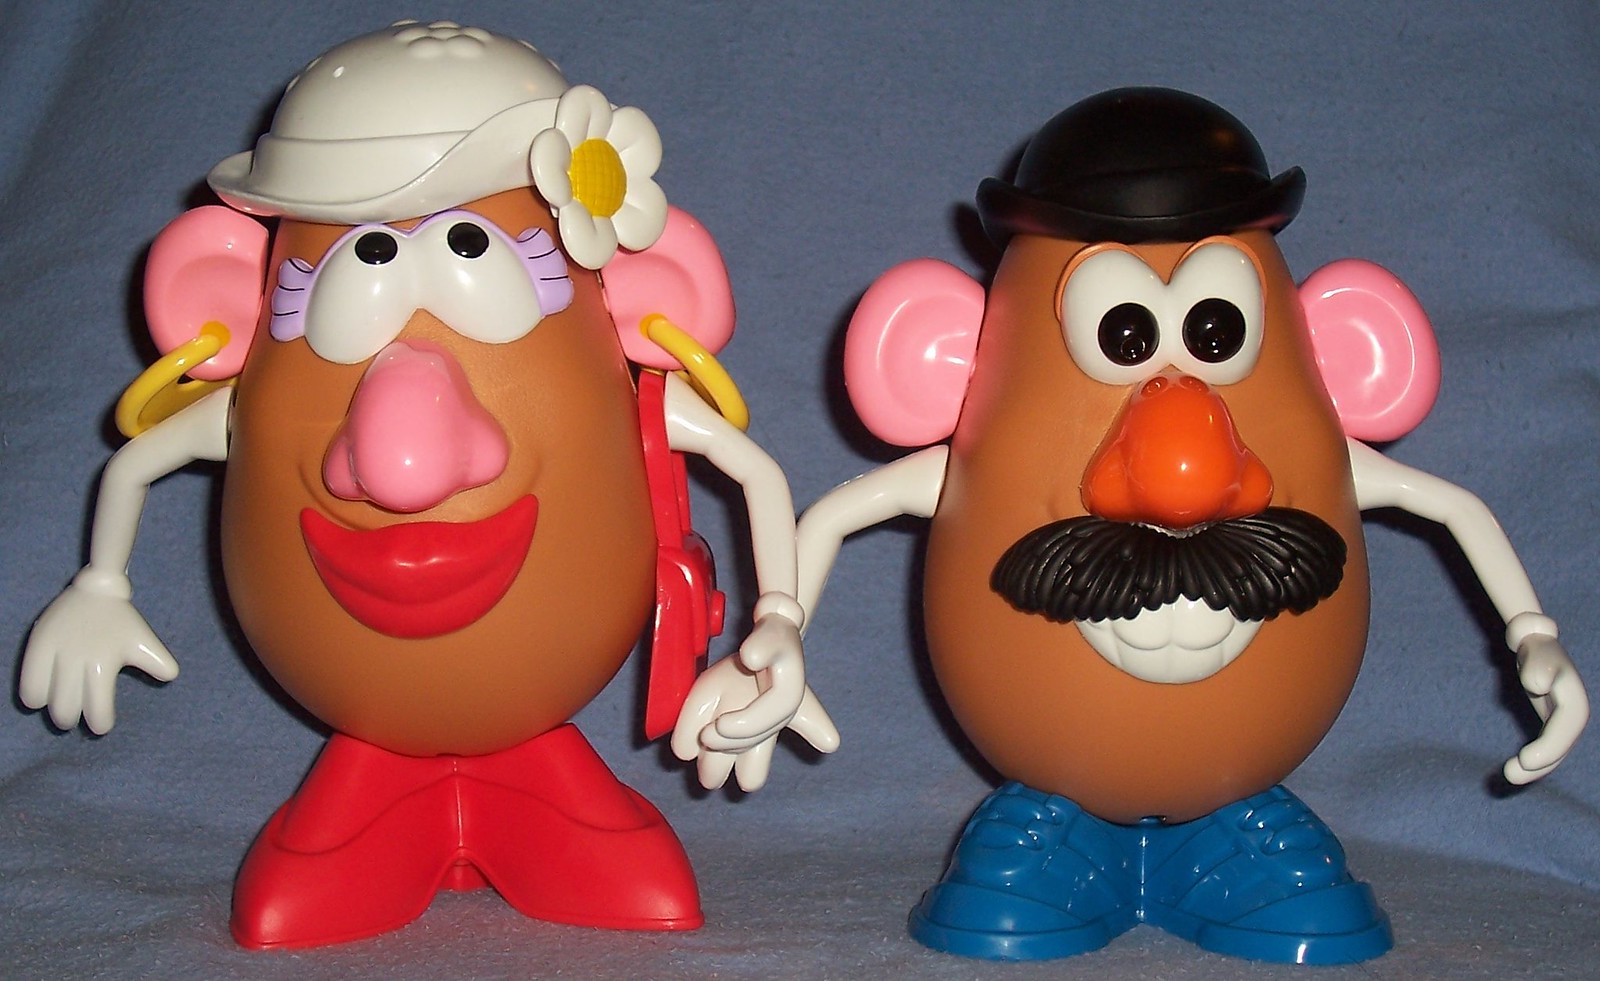 Toy Story 3 - Mr. and Mrs. Potato Heads | Toy Story 3 - Mr. … | Flickr